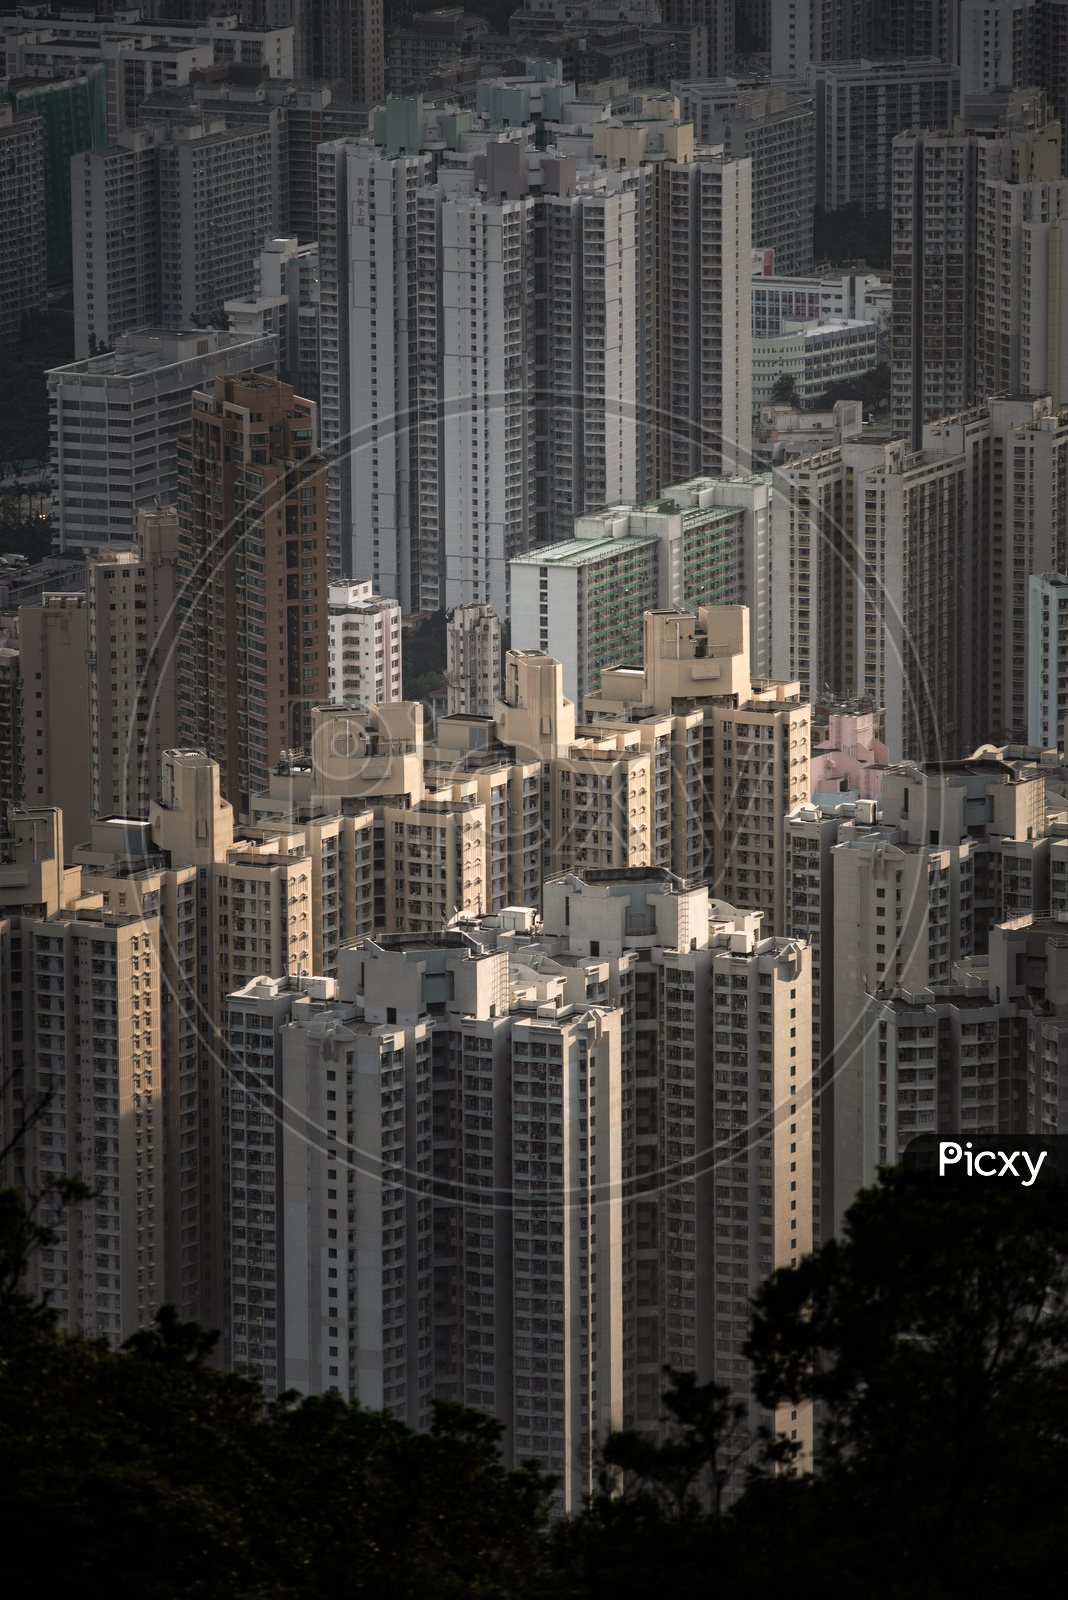 Hing Kong City Scape With Sky Scraper Buildings